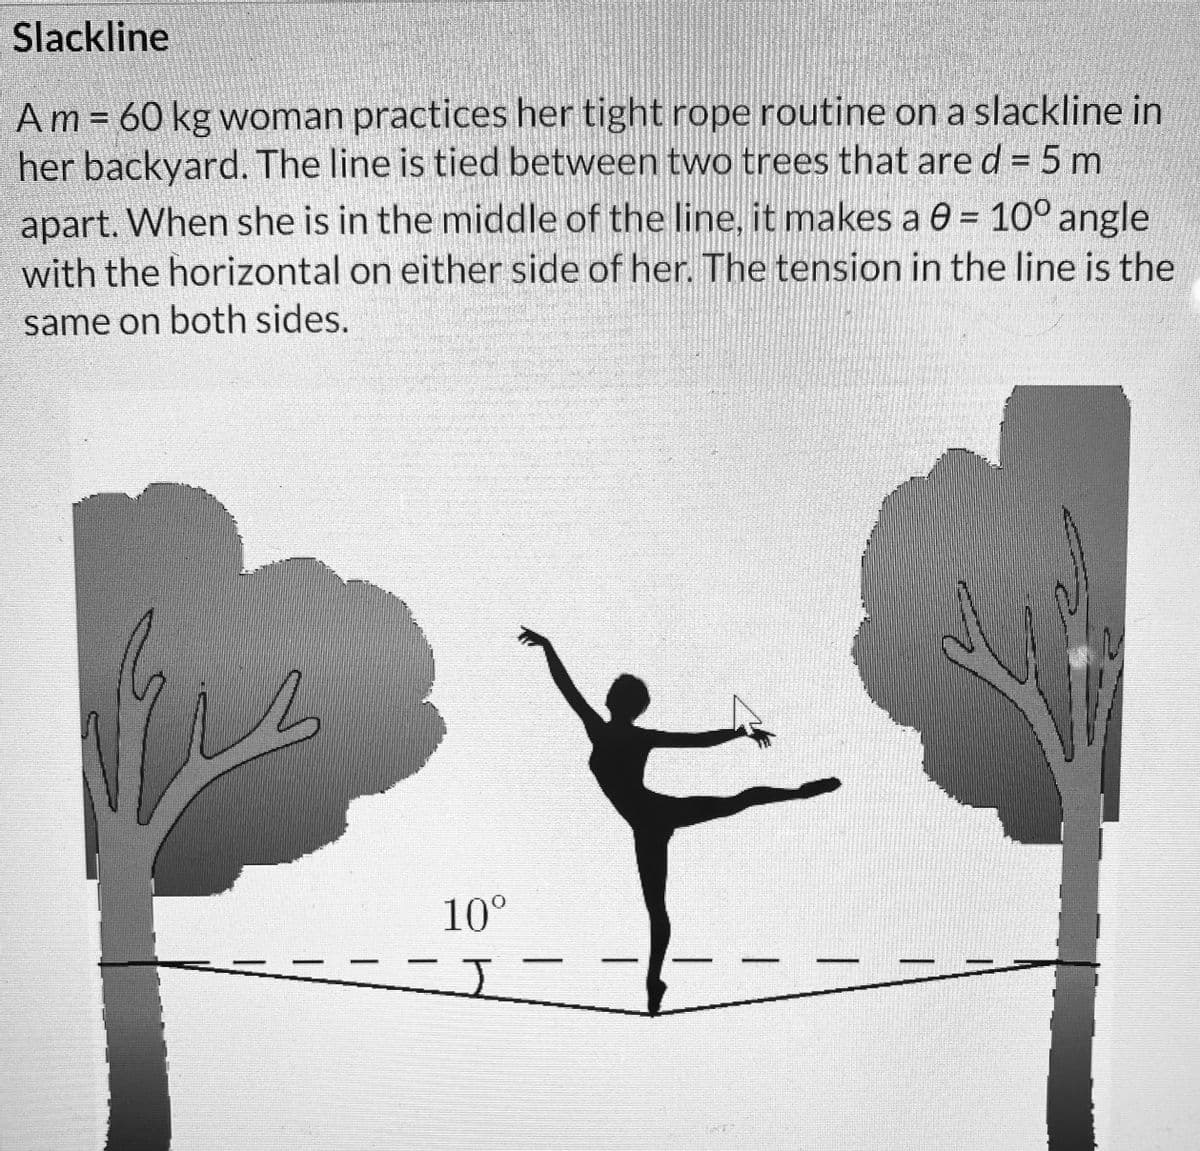 Slackline
Am = 60 kg woman practices her tight rope routine on a slackline in
her backyard. The line is tied between two trees that are d = 5m
apart. When she is in the middle of the line, it makes a 0 = 10° angle
with the horizontal on either side of her. The tension in the line is the
same on both sides.
Mi
10⁰
-I